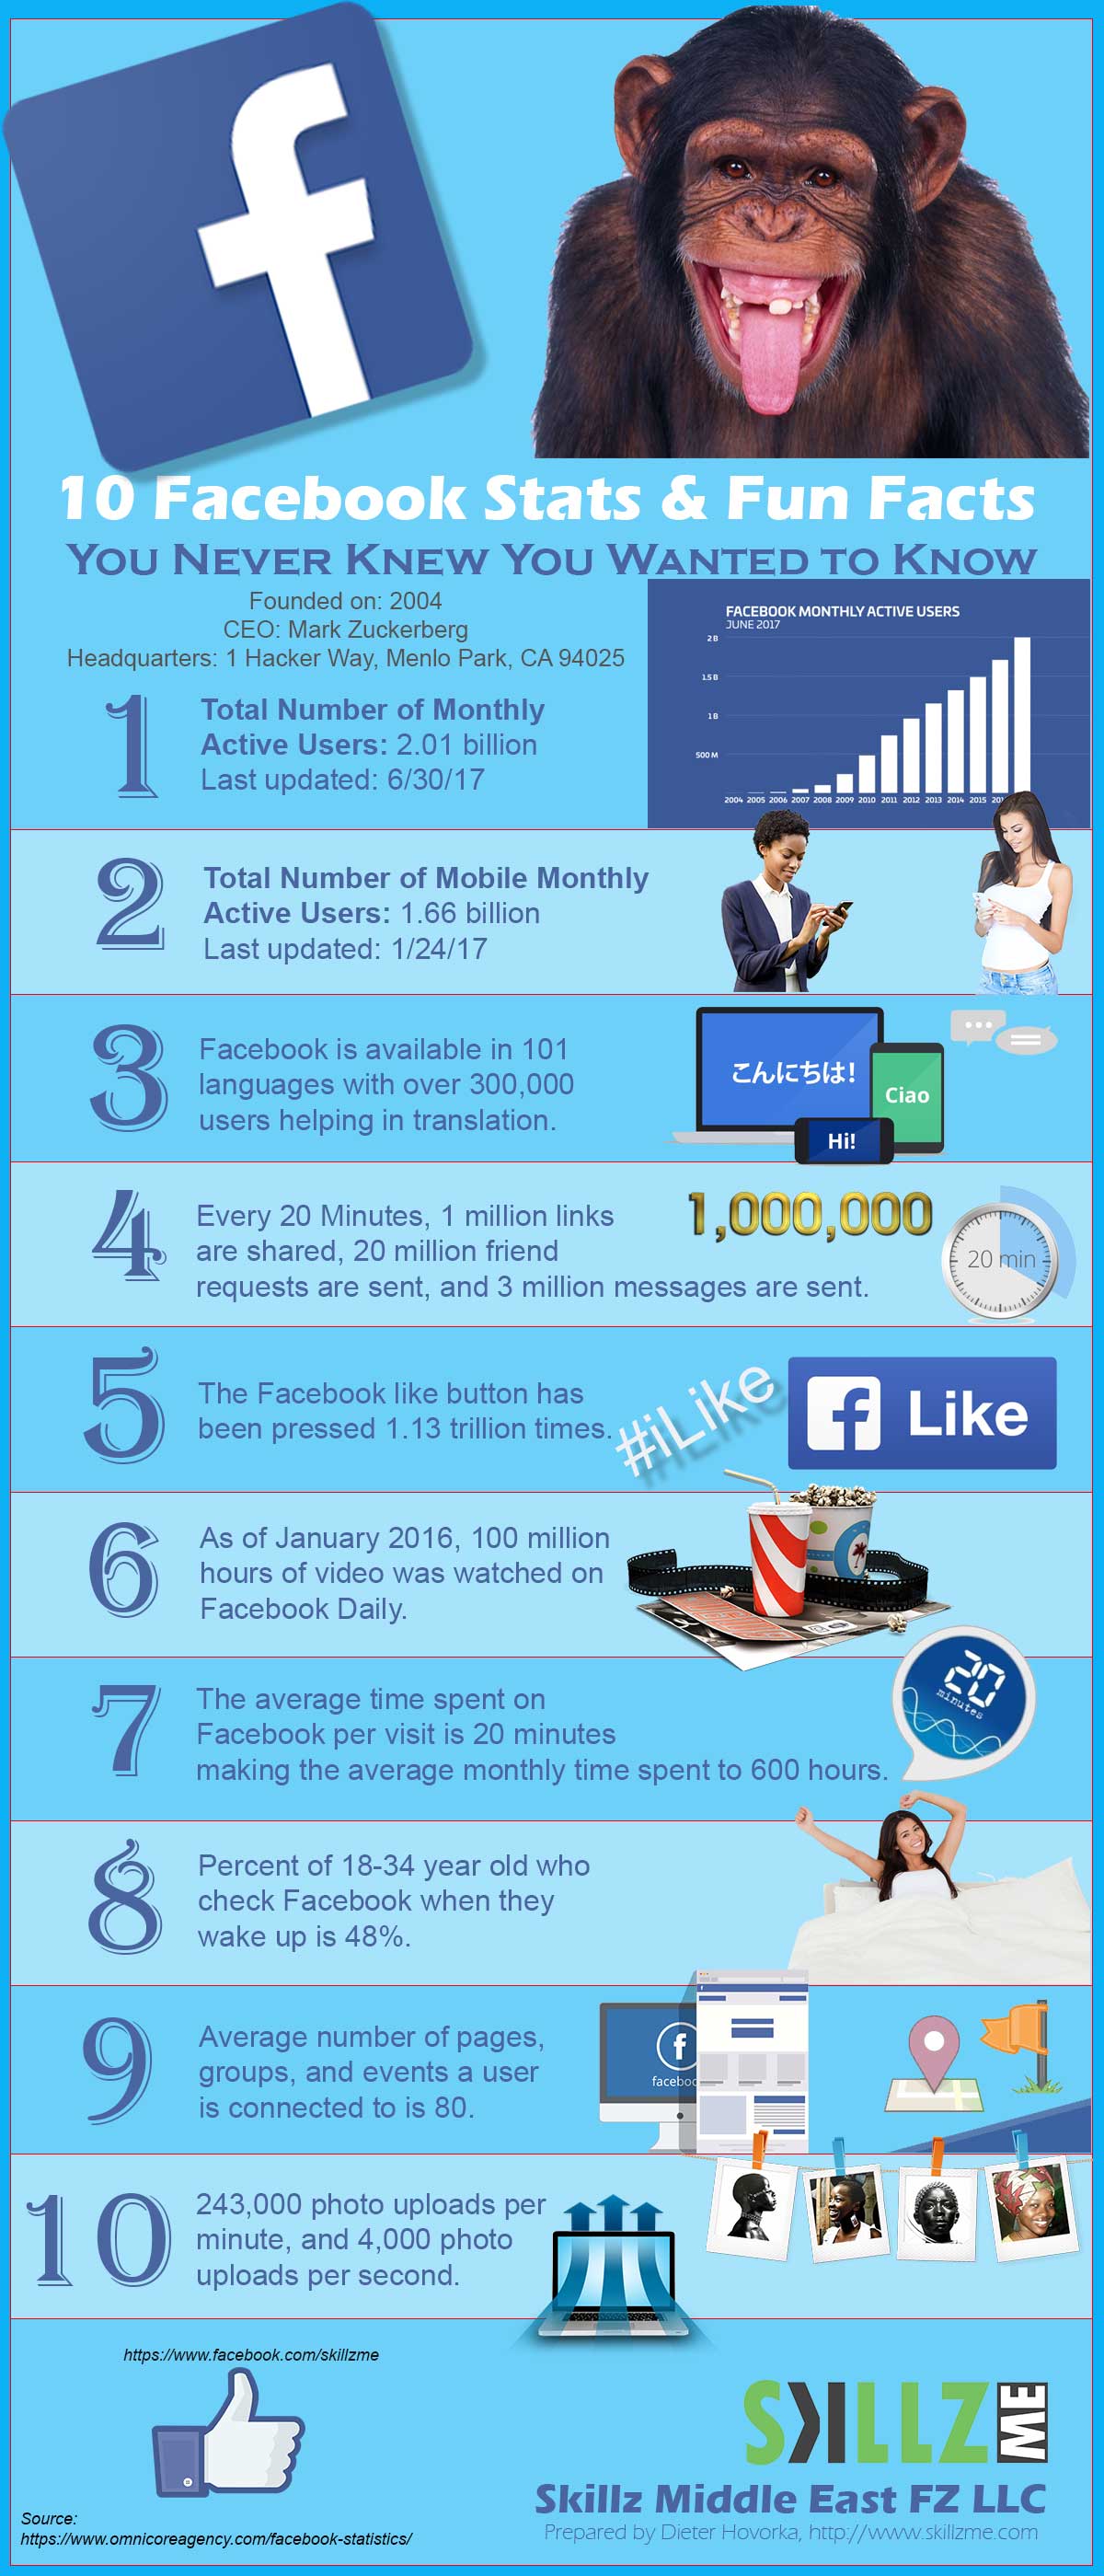 Infographic 10 Facebook Stats and Fun facts 